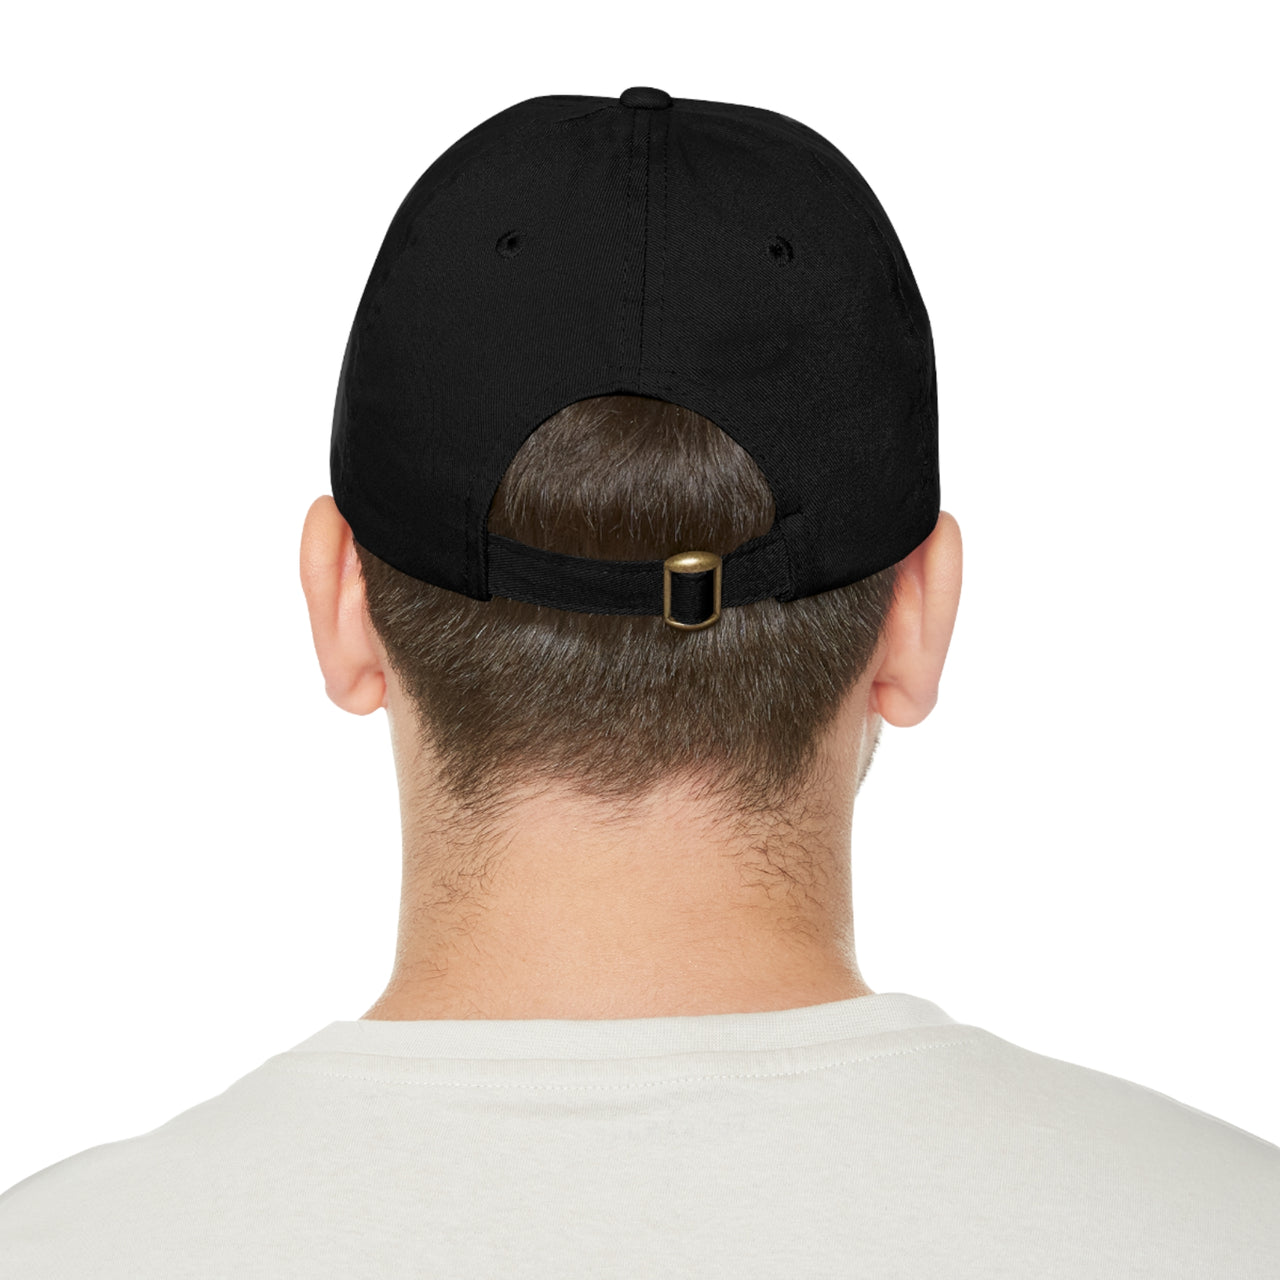 Chelsea Stamford Bridge Dad Hat with Leather Patch (Round)